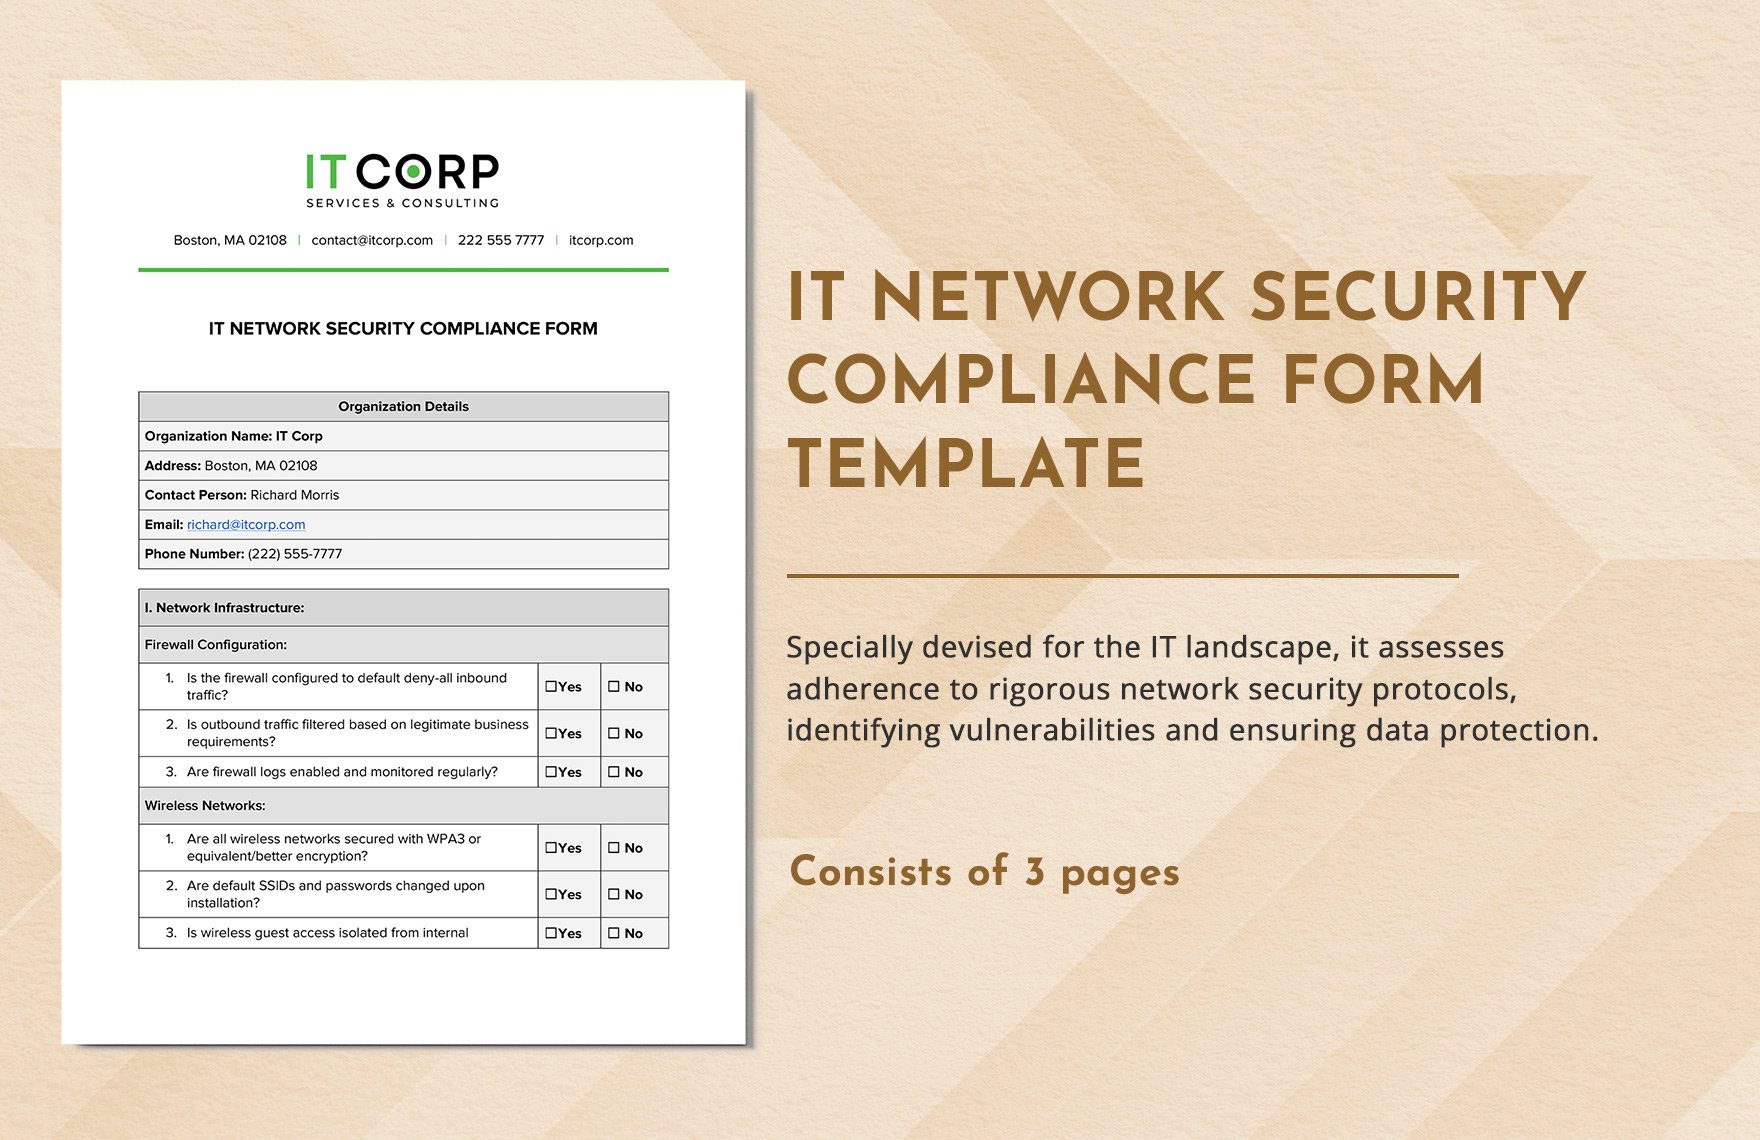 IT Network Security Compliance Form Template